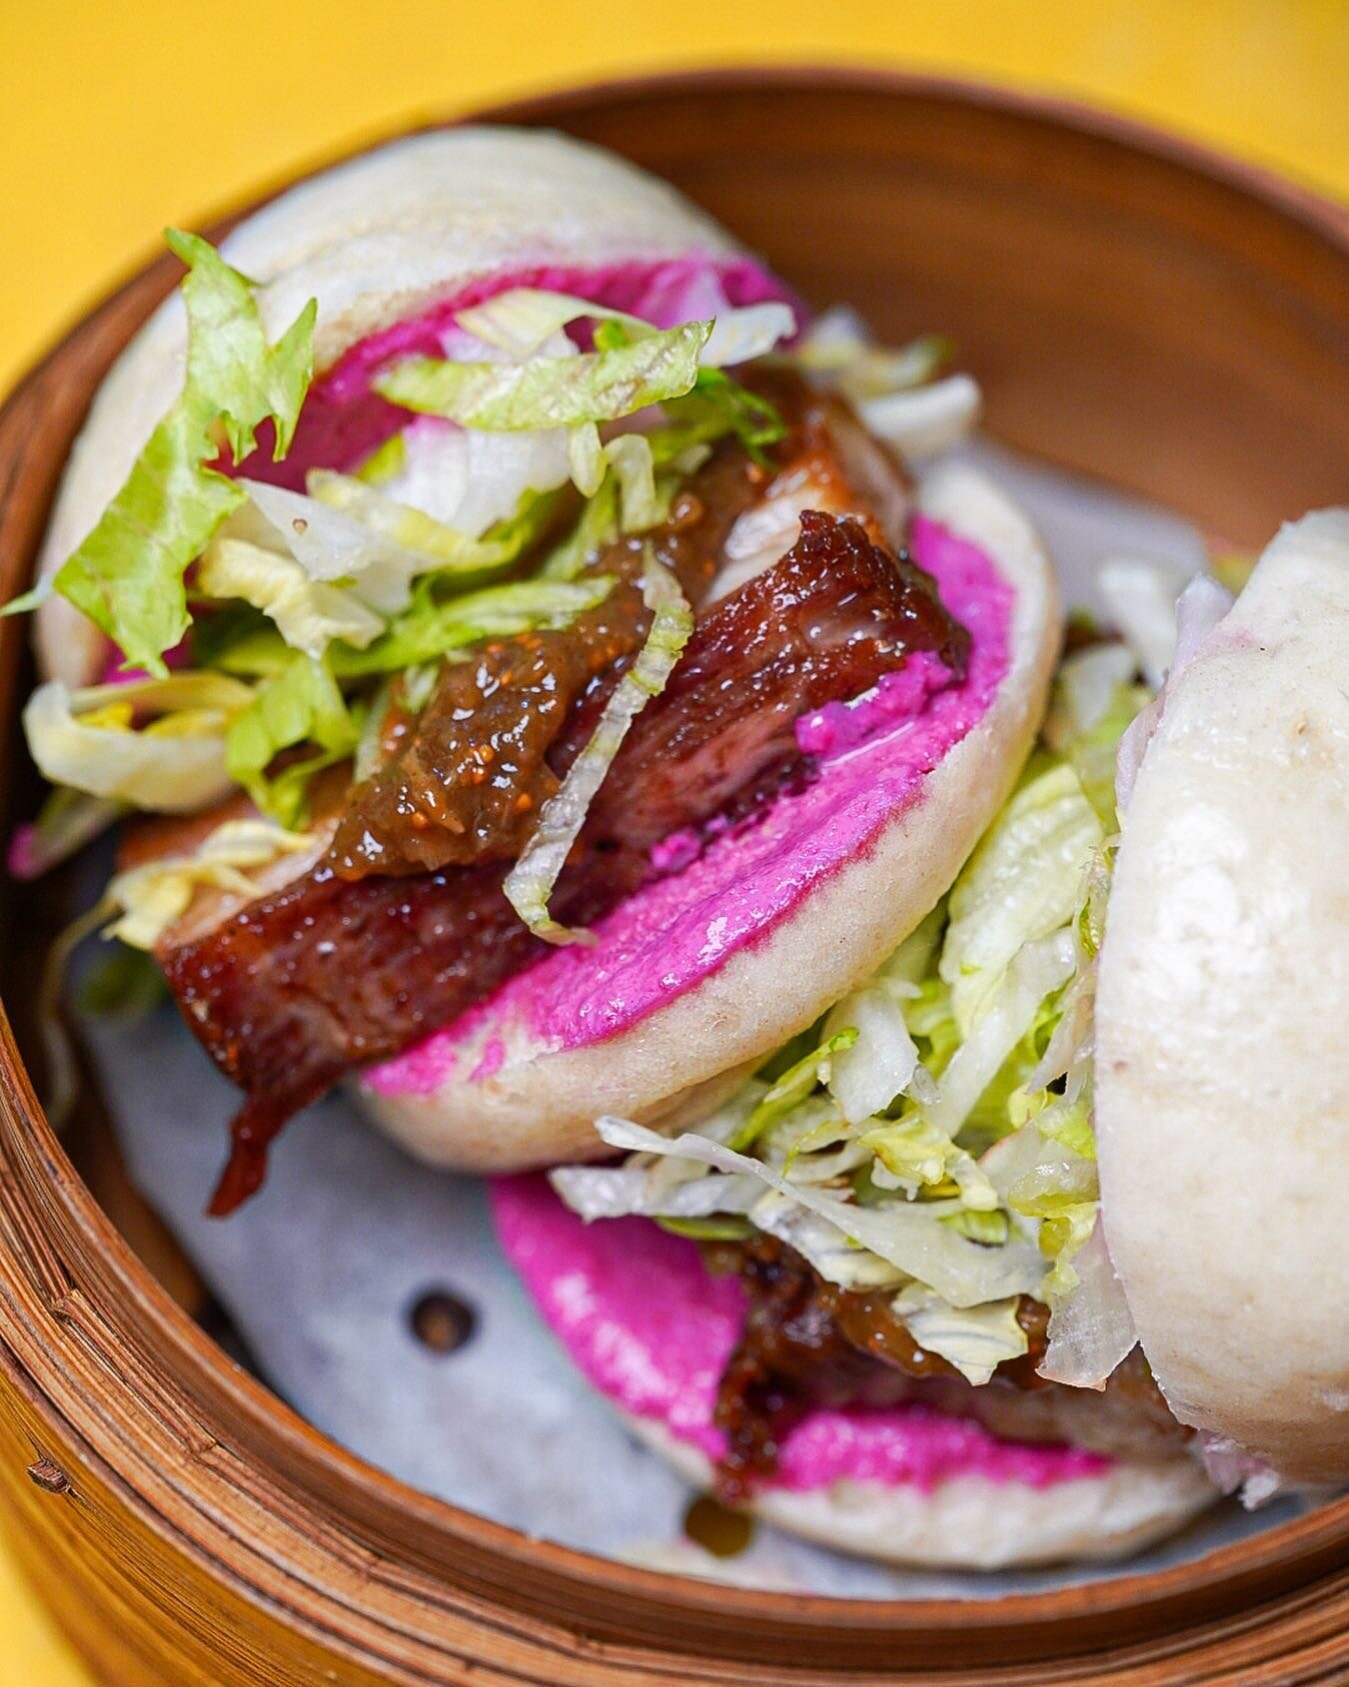 Pork Belly Mantou (Fall Menu) 

This fall menu, our 8-hr slow roasted pork belly is paired with a savoury fig jam, marinated fennel, lettuce, and pickled beet crema! 

-
Plus: enjoy 2 free pcs of our pork belly baos plus other great offers when you j